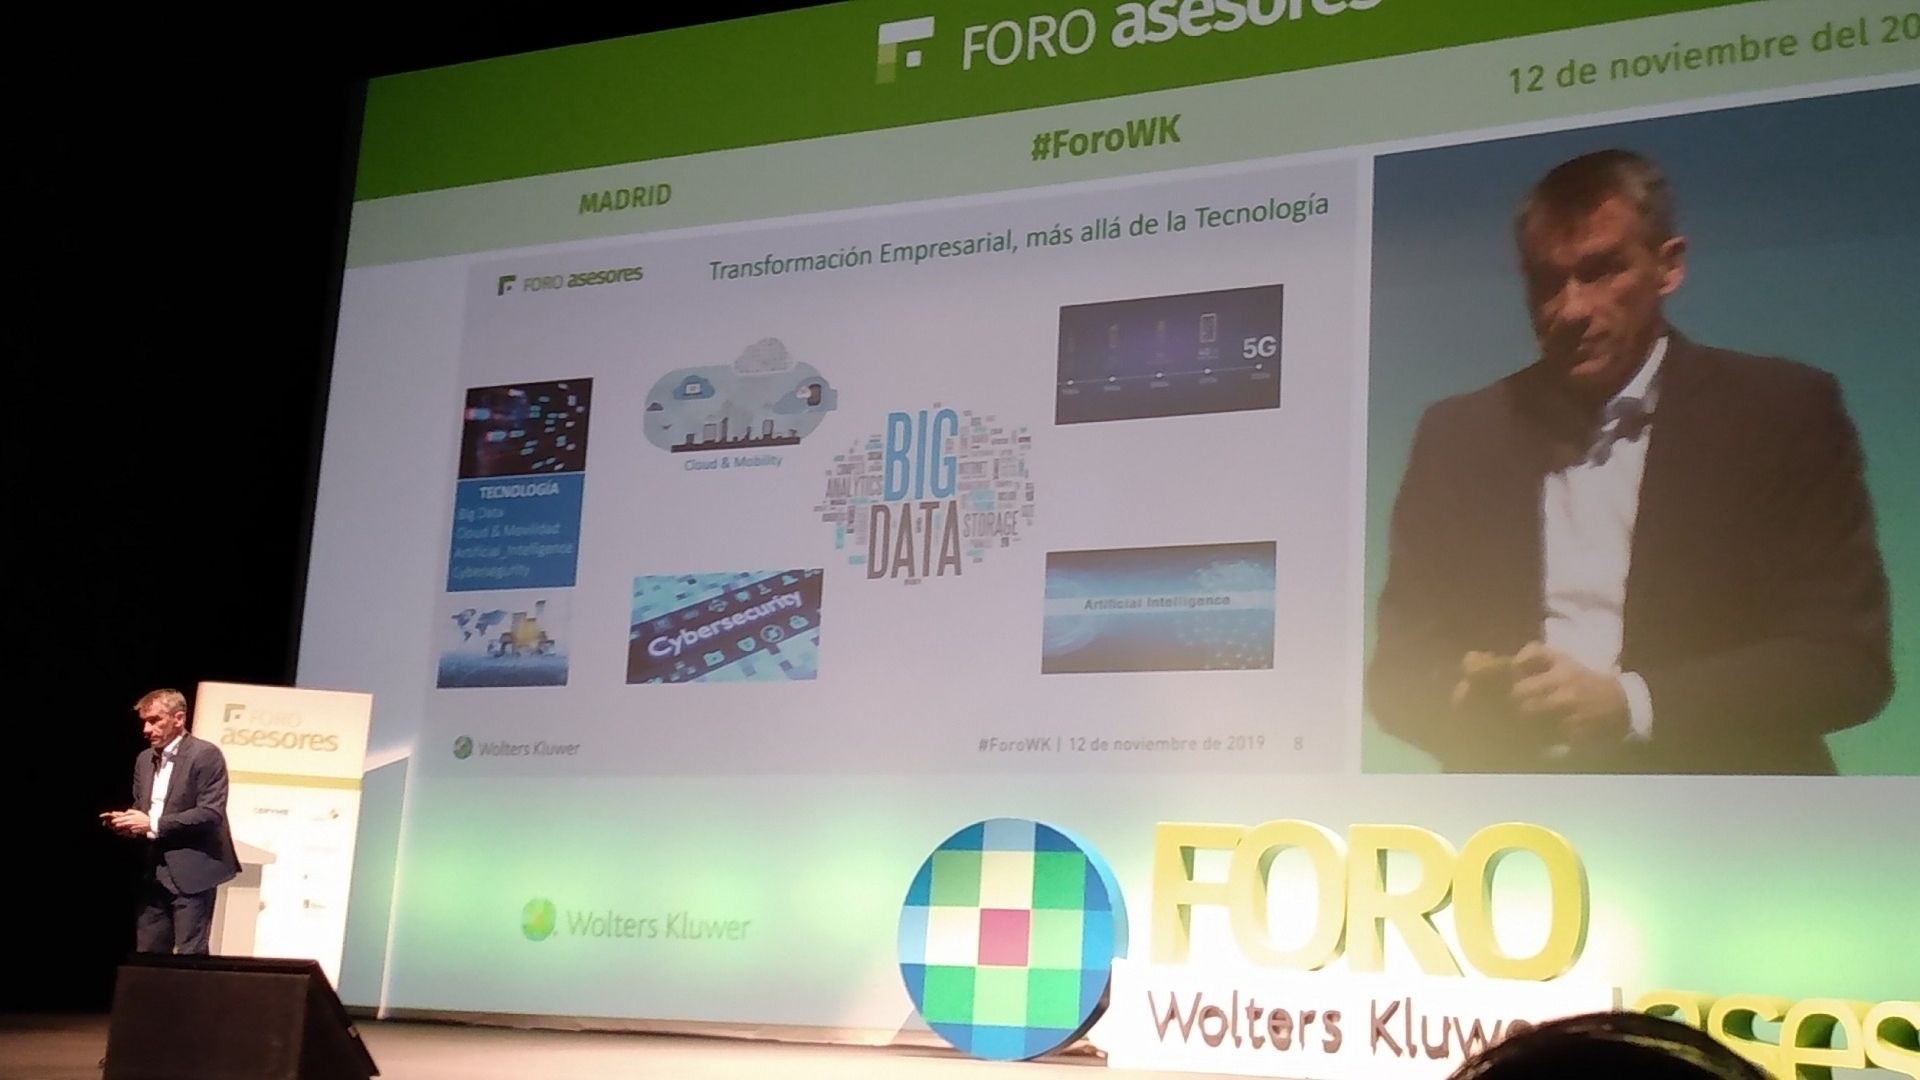 Foro Asesores Wolters Kluwer